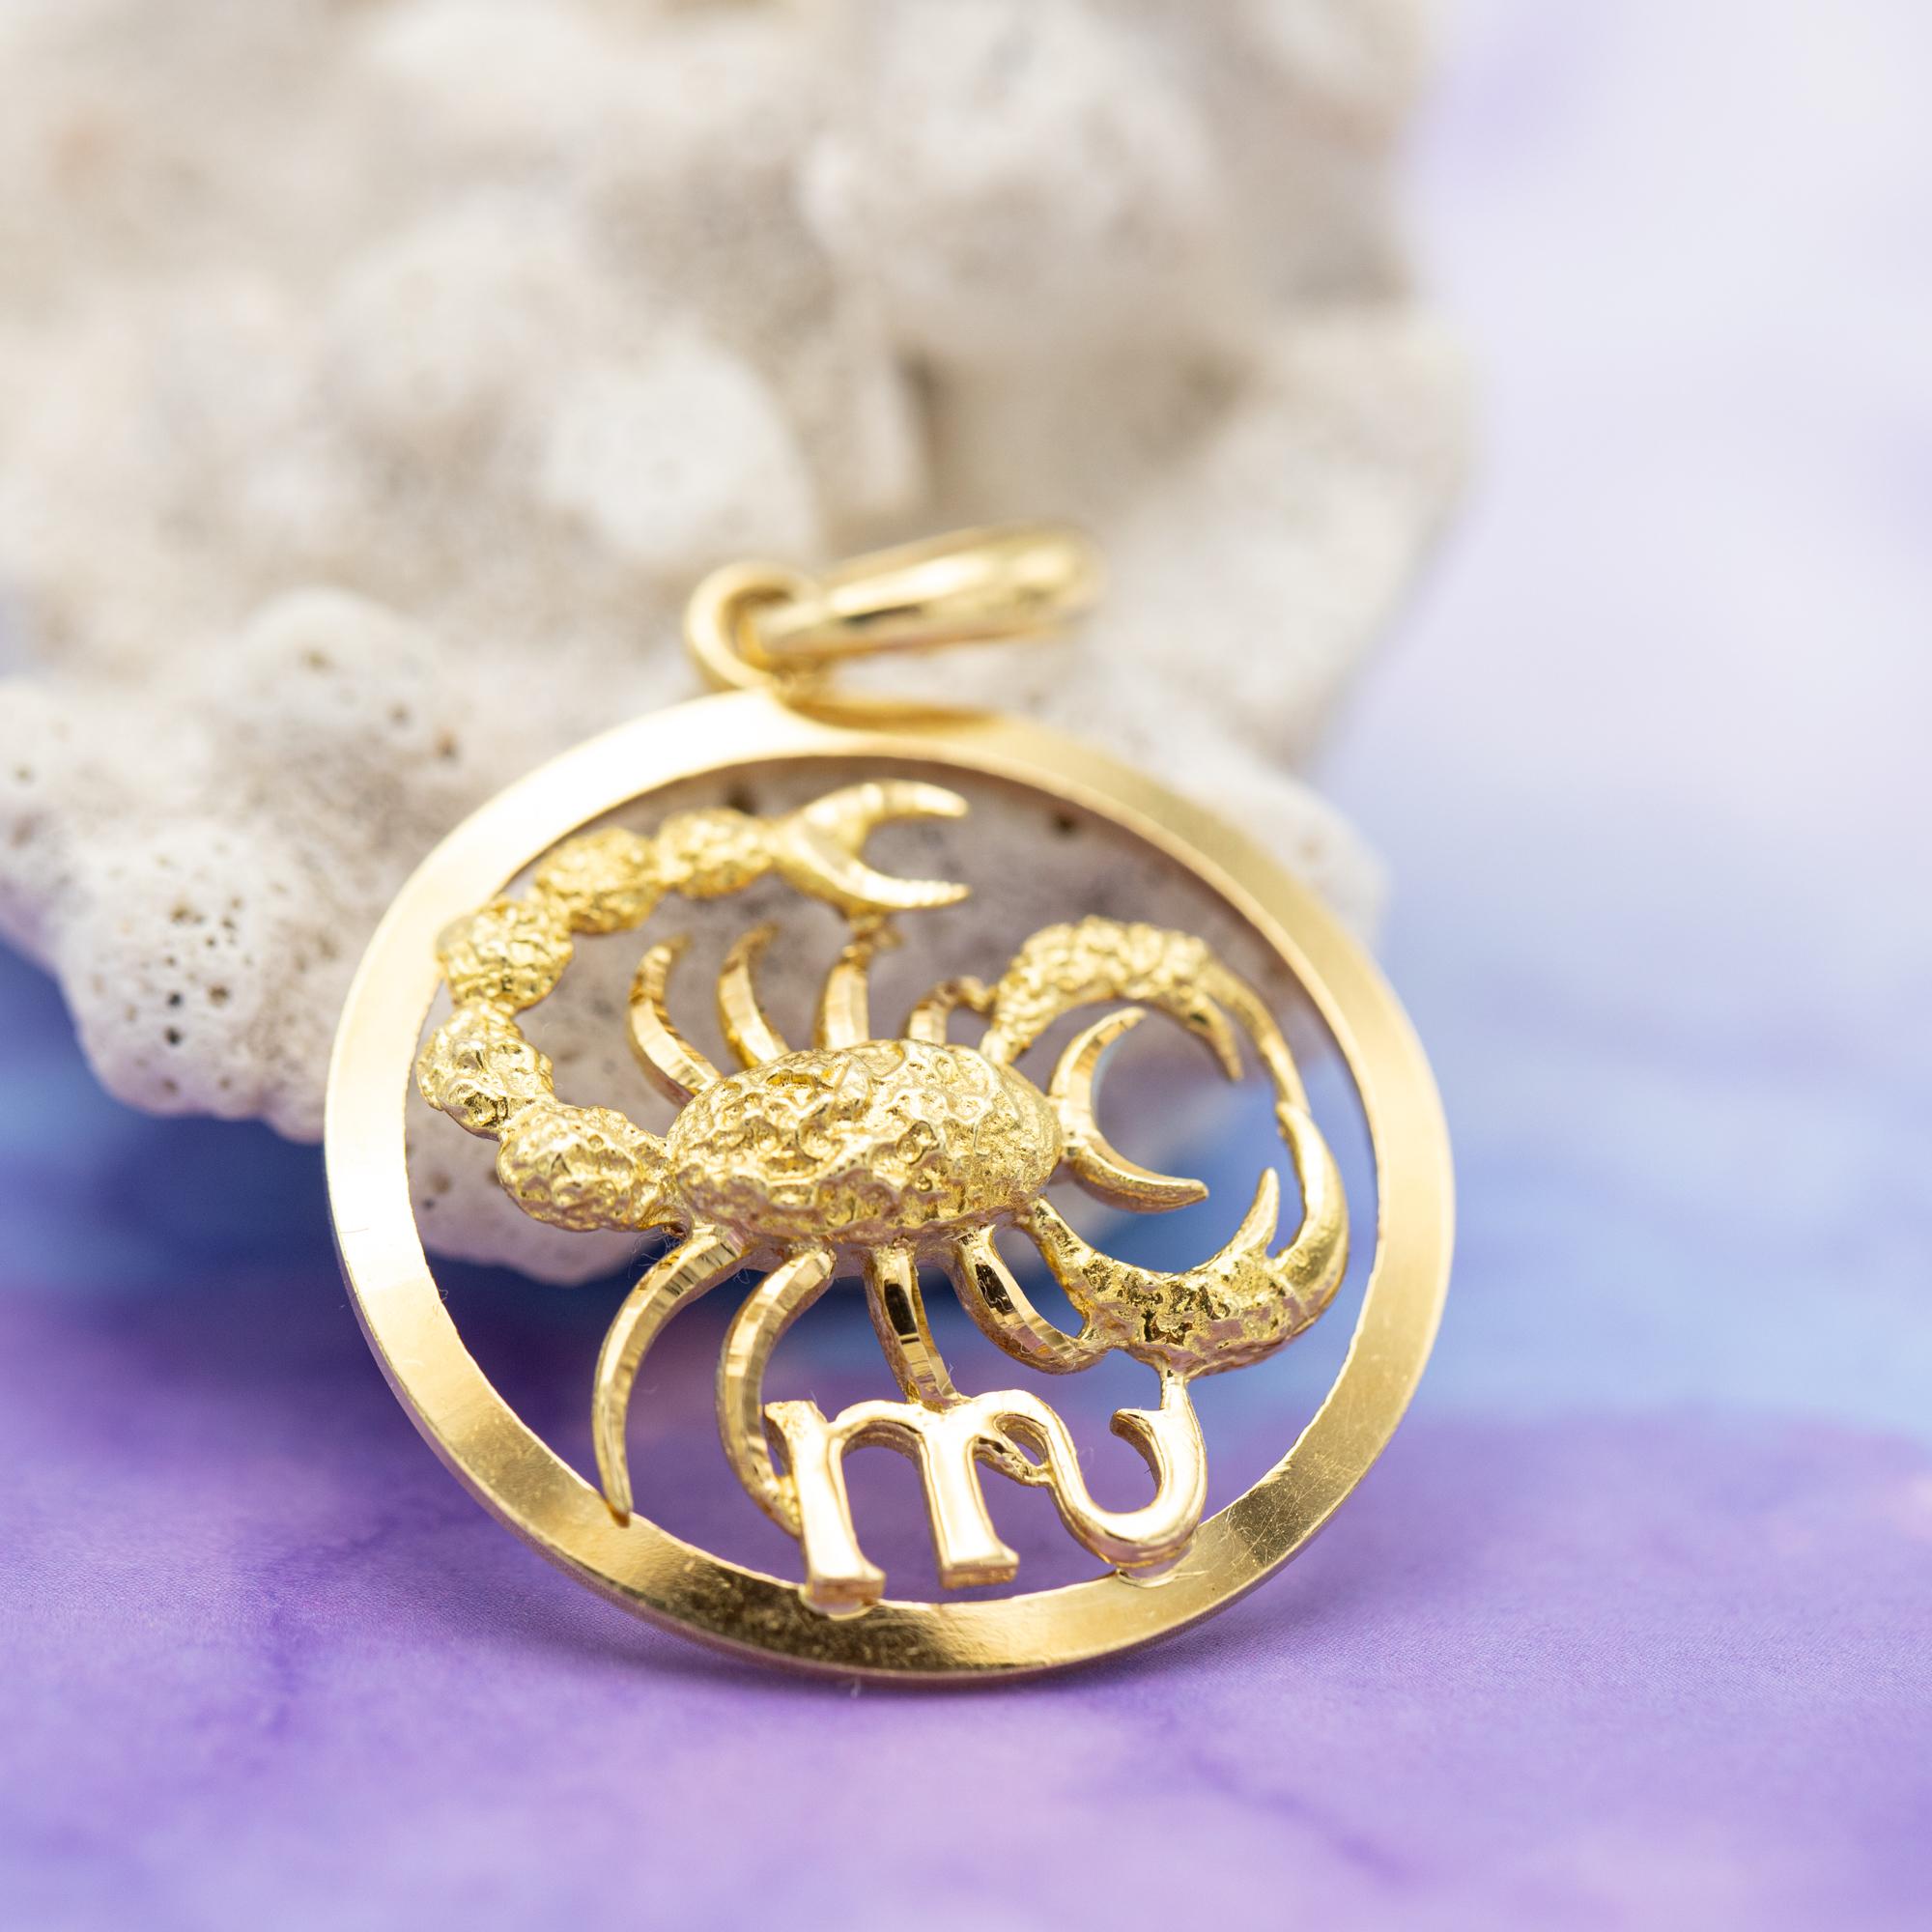 For sale is this vintage charm depicting a Scorpio, the eighth astrological sign in the zodiac. This Constellation Star Sign Pendant is associated with the birth dates between 22 October and 21 November. This pretty charm is crafted out of 18 ct